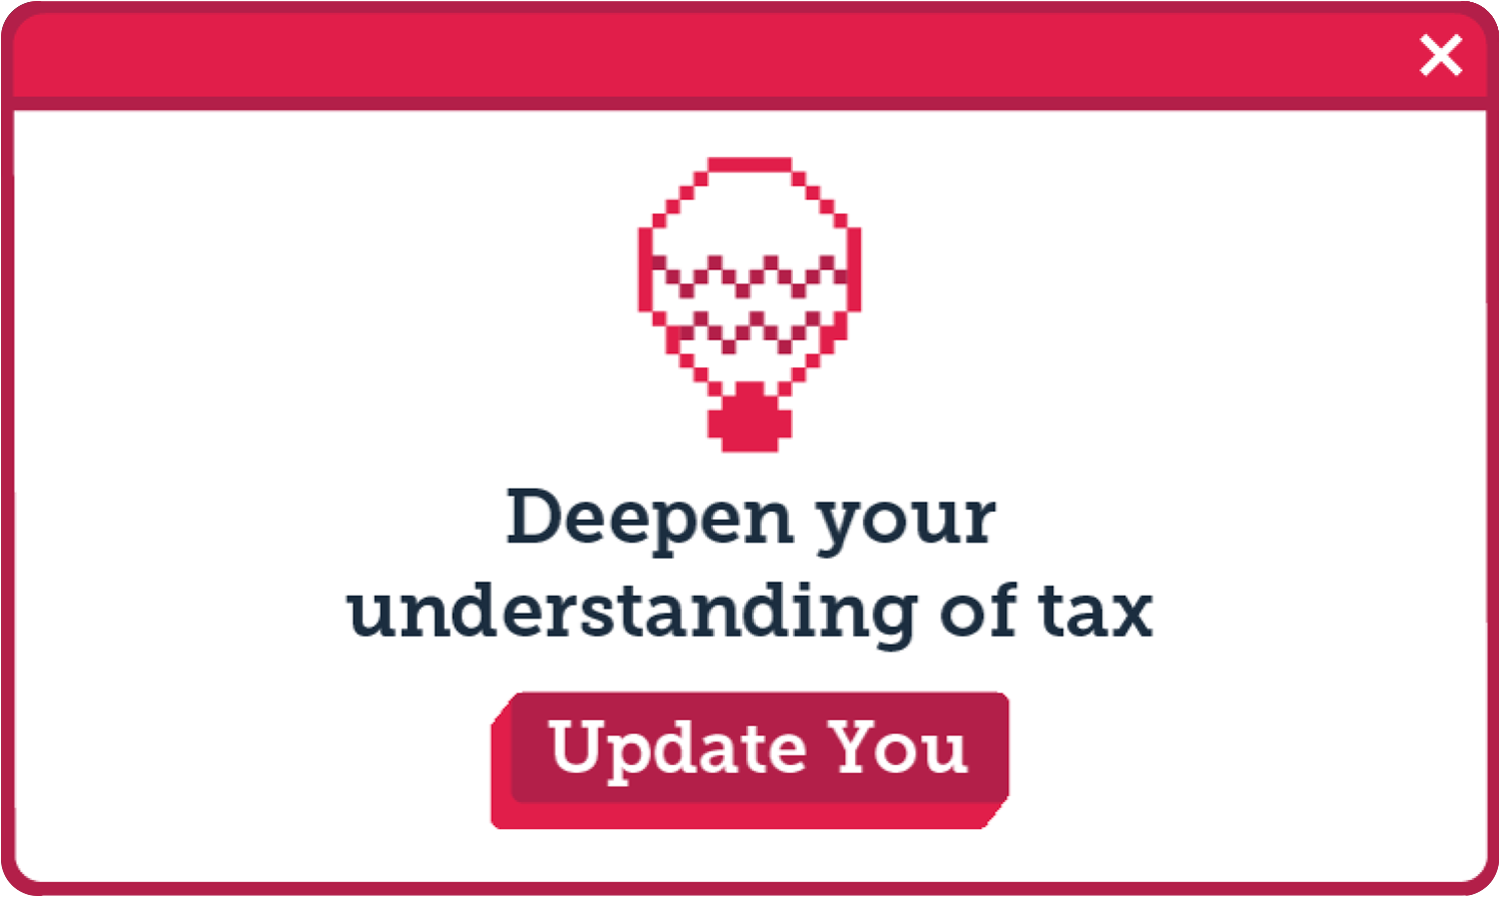 graphic box: "Deepen your Understanding of tax", update you button